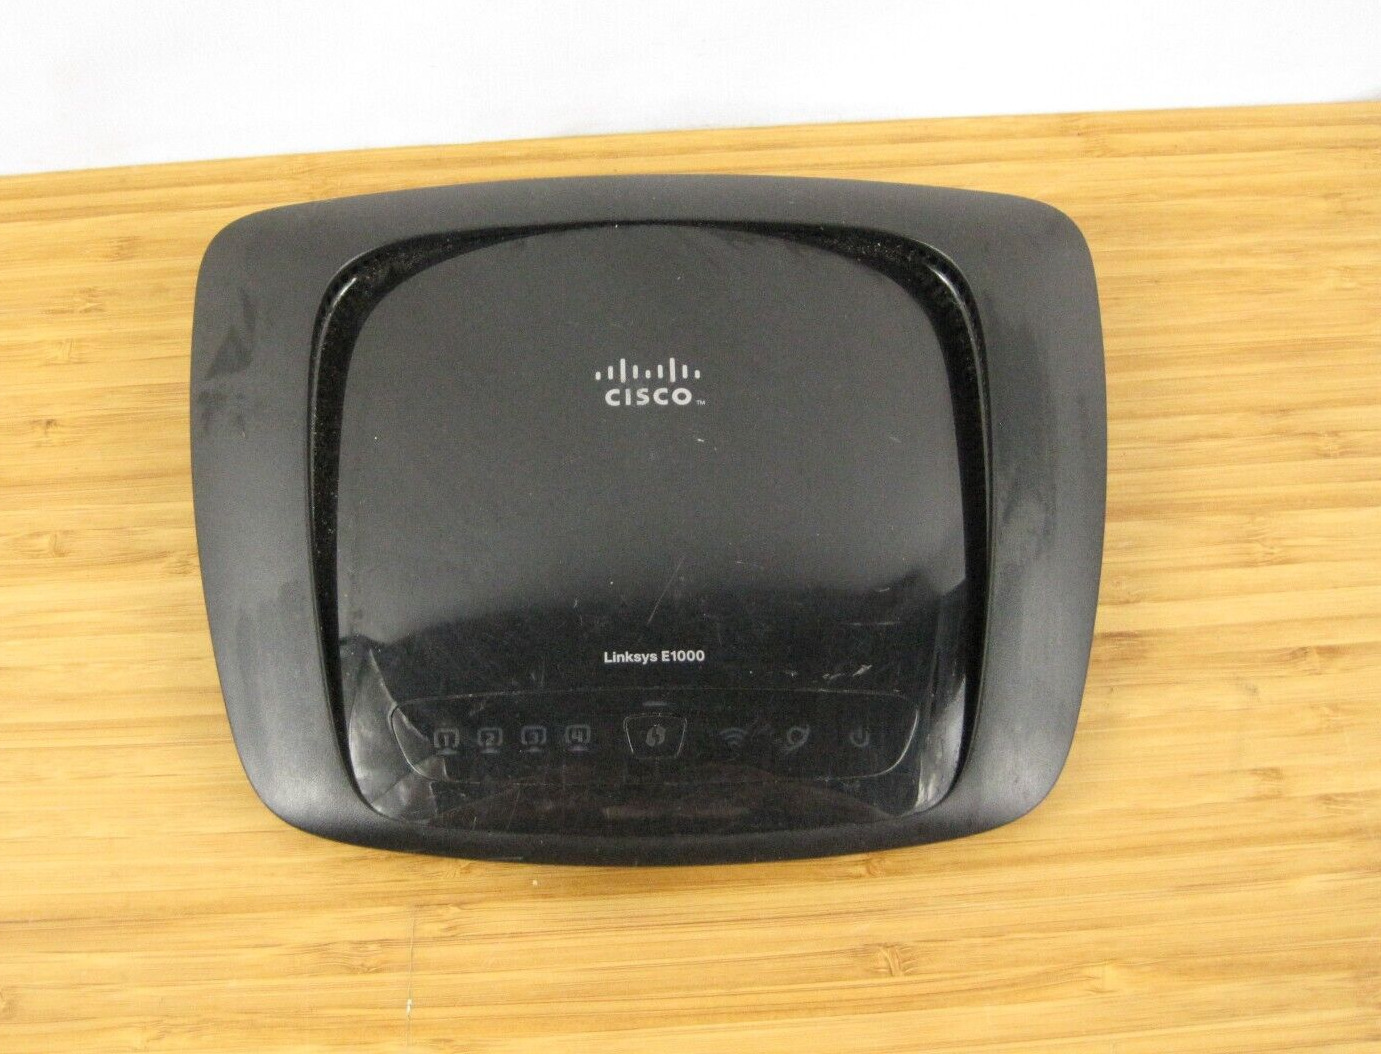 CISCO-LINKSYS E1000 WIRELESS ROUTER-4 FAST ETHERNET PORTS 10/100 2.4GHz - Tested